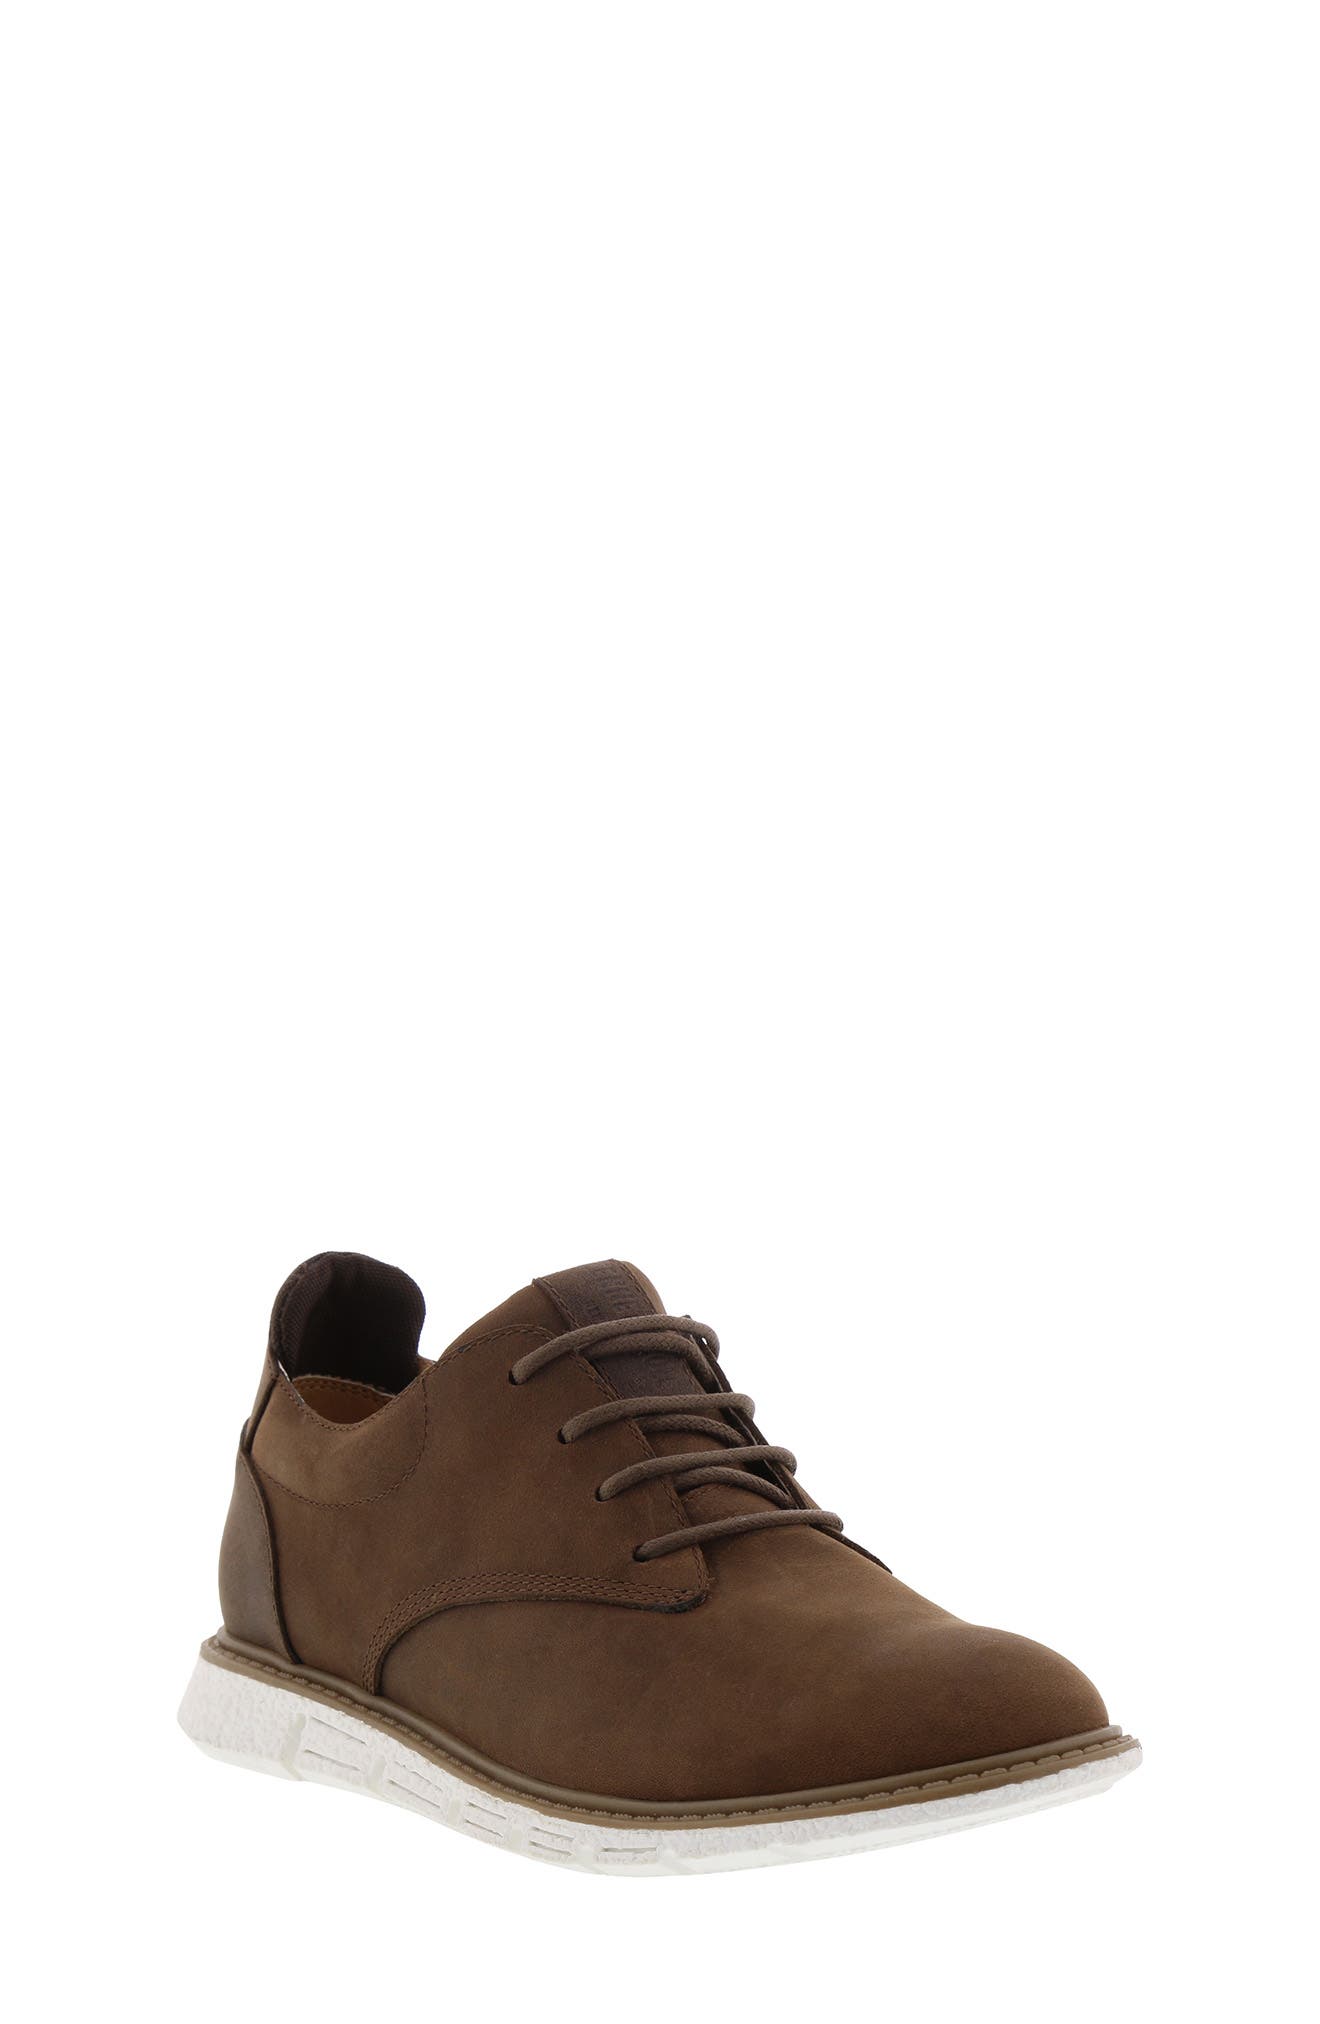 UPC 031000000097 product image for Boy's Kenneth Cole New York Broad-Way Jay Derby | upcitemdb.com